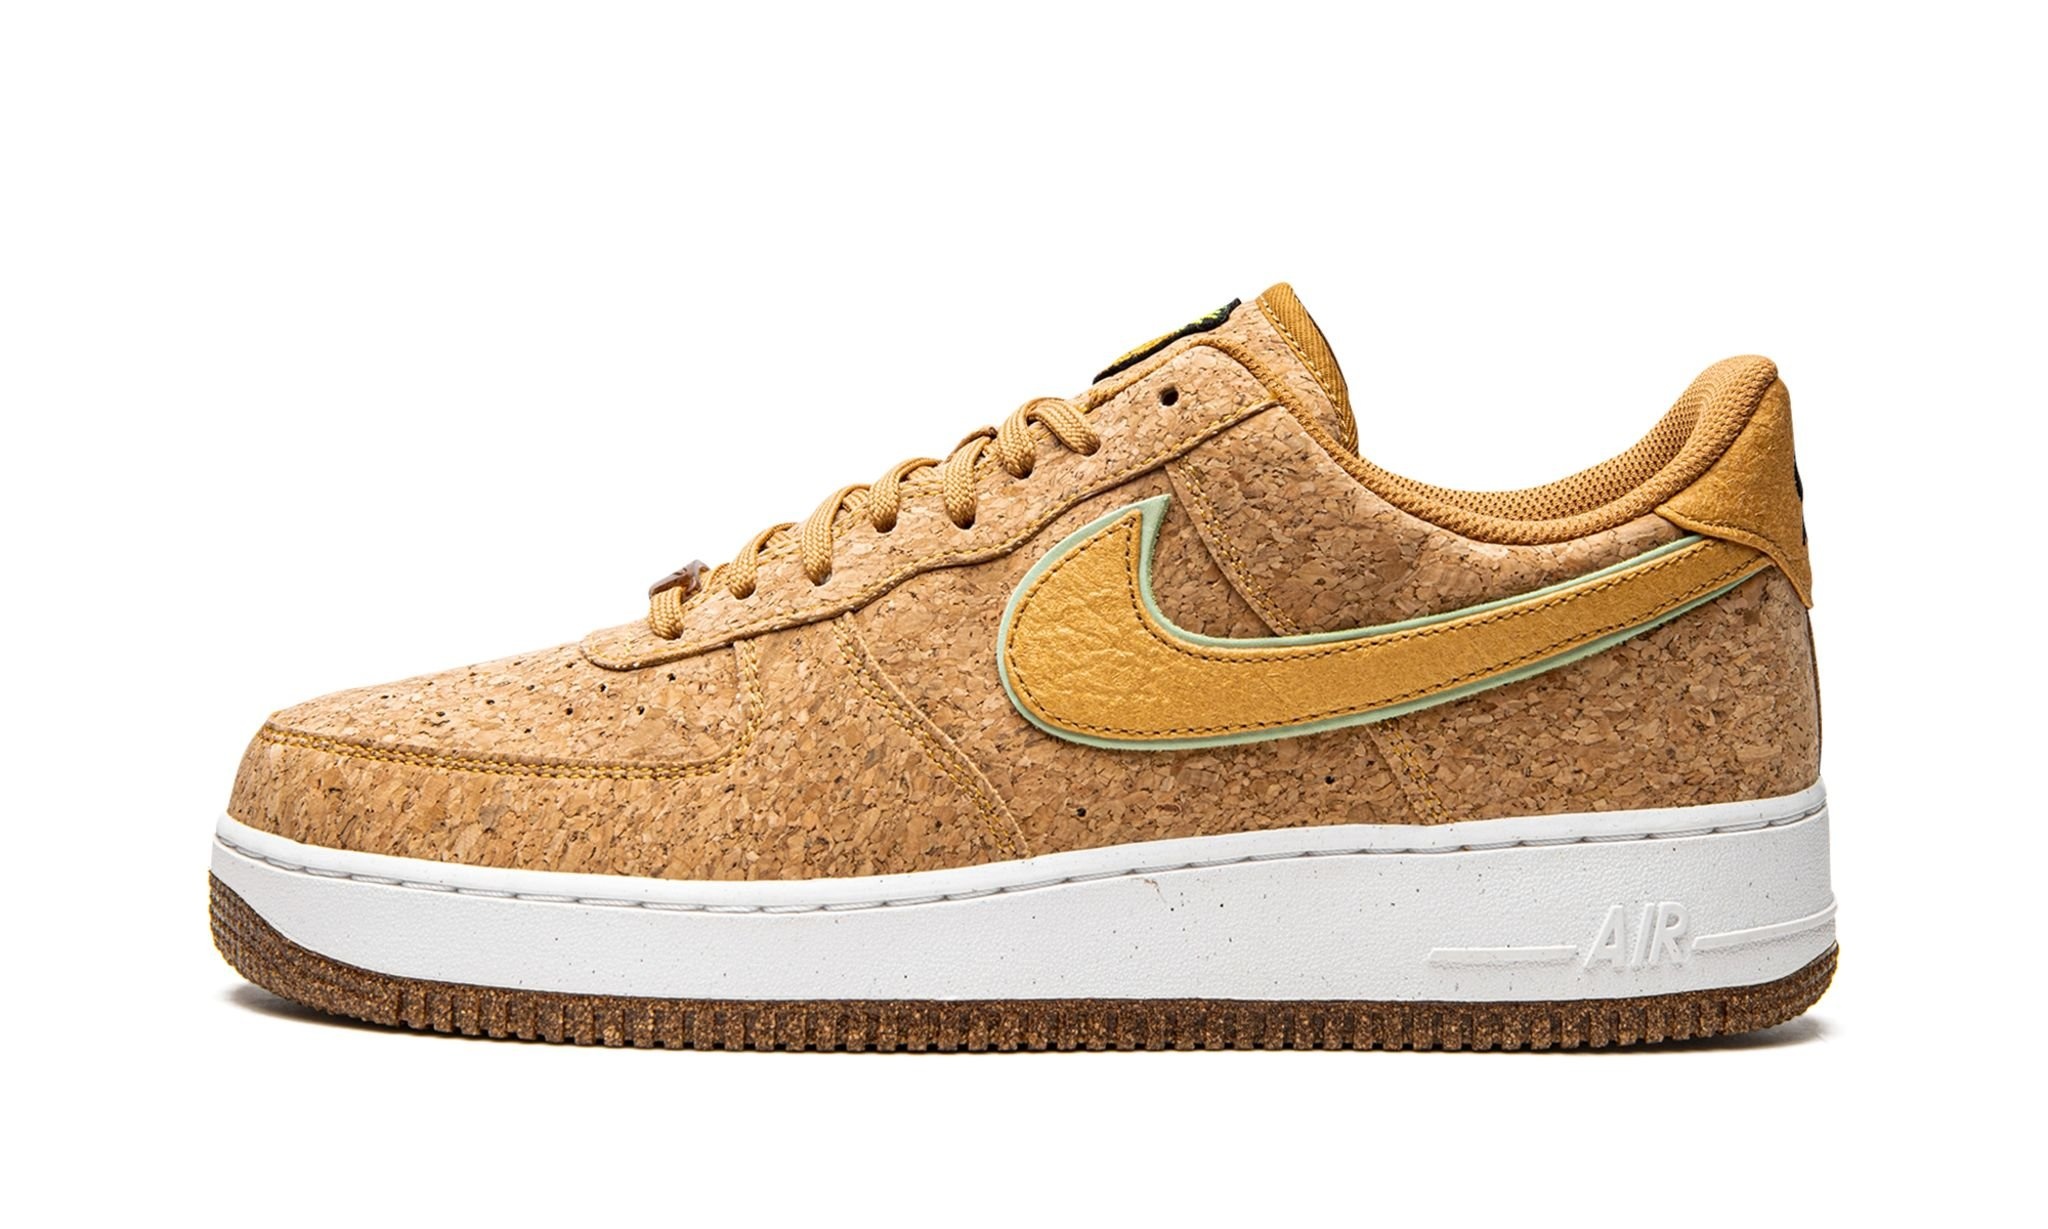 Air Force 1 Low "Happy Pineapple" - 1